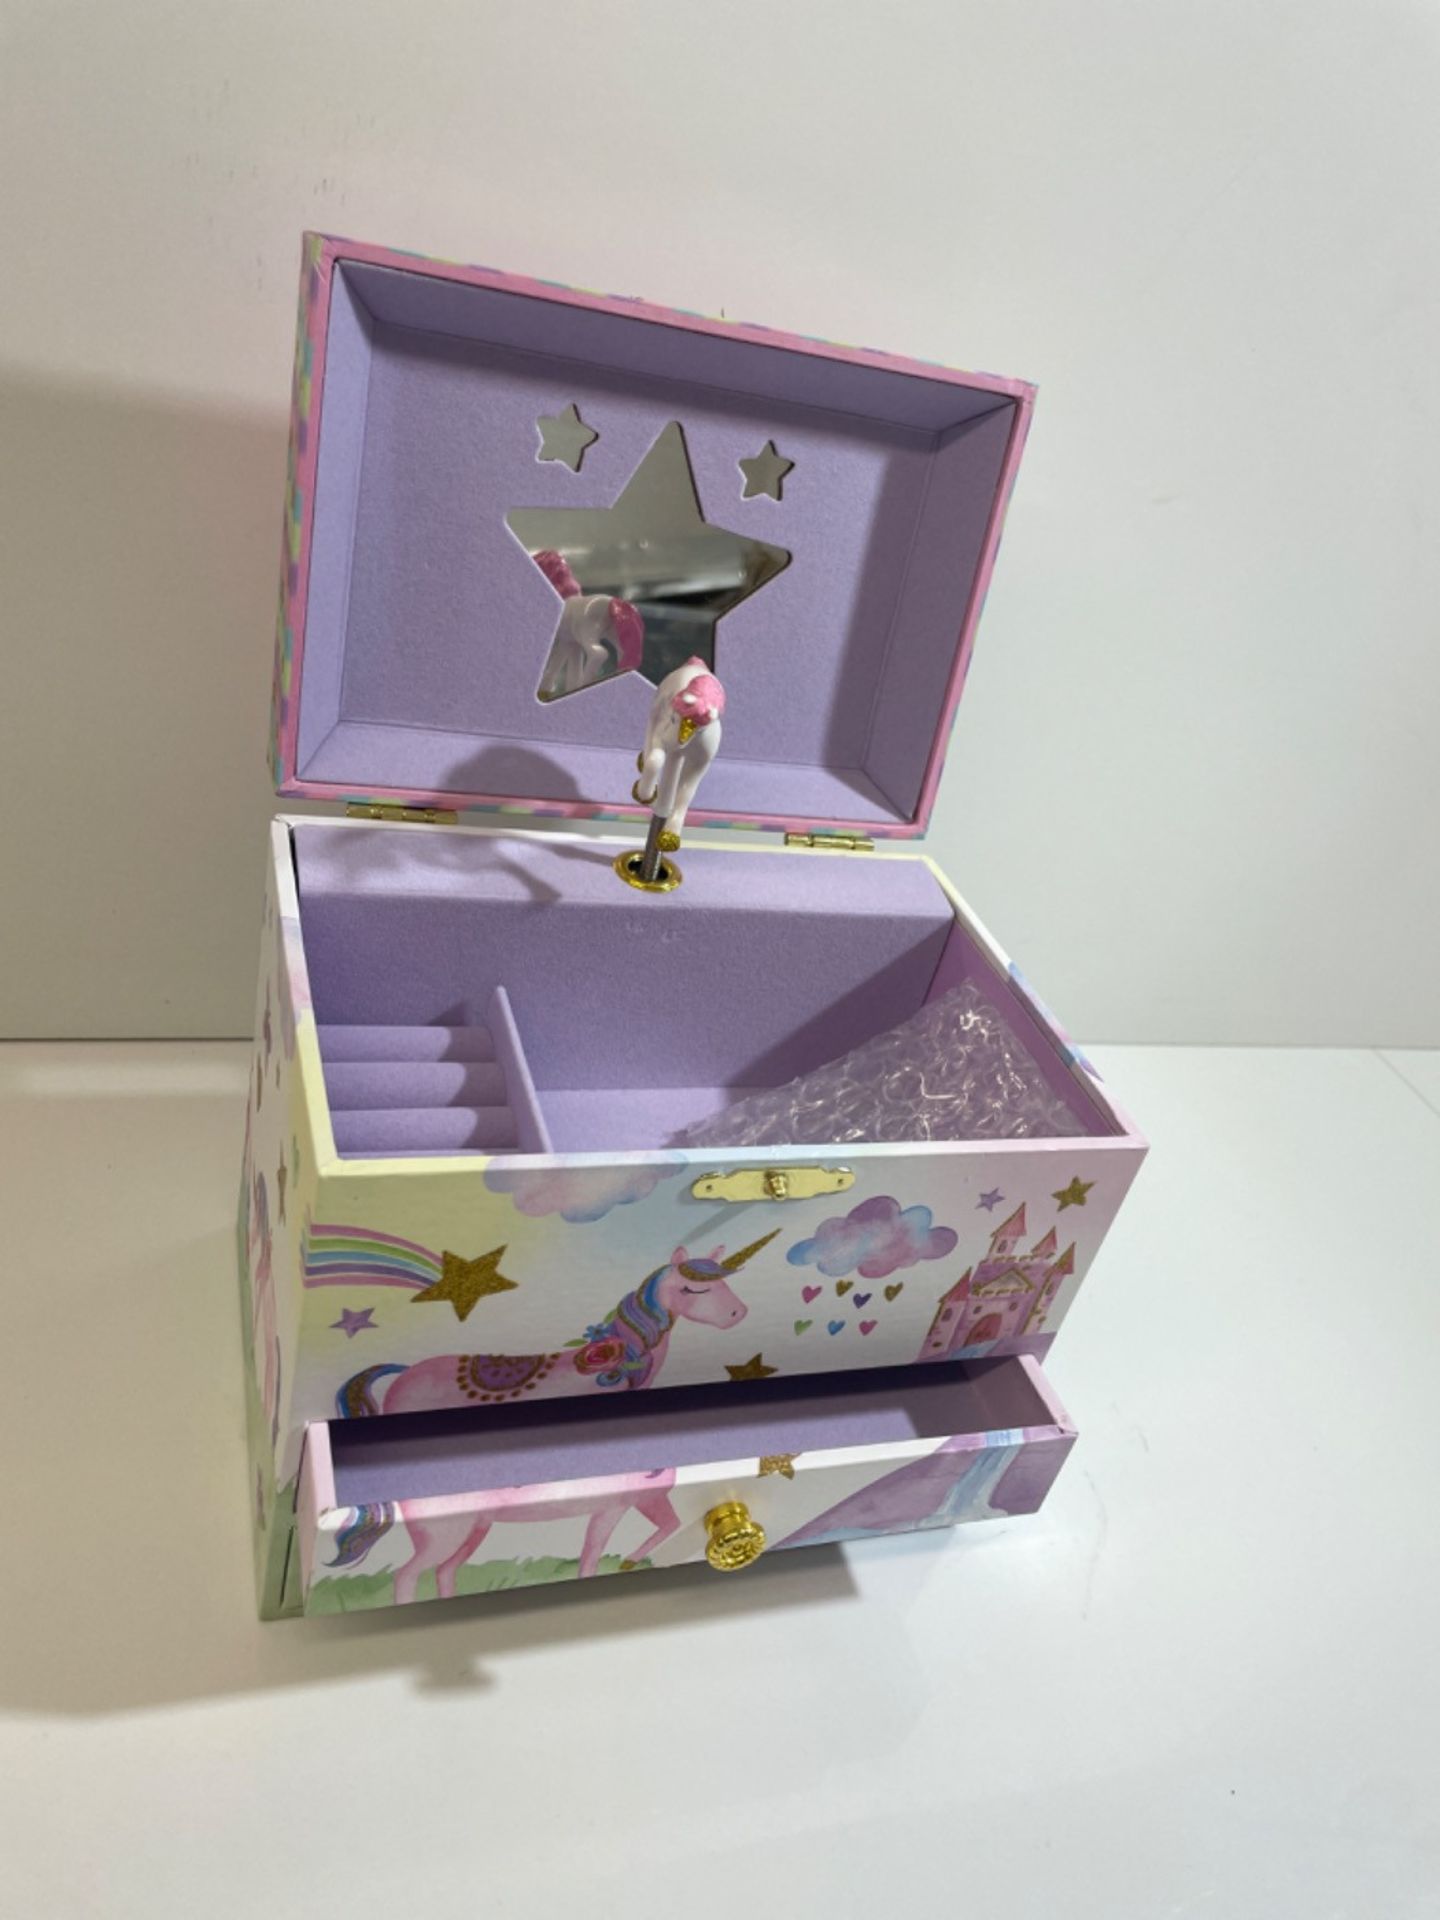 Jewelkeeper Unicorn Jewellery Box For Girls With 2 Pull-Out Drawers, Glitter Rainbow and Stars Un... - Image 3 of 3